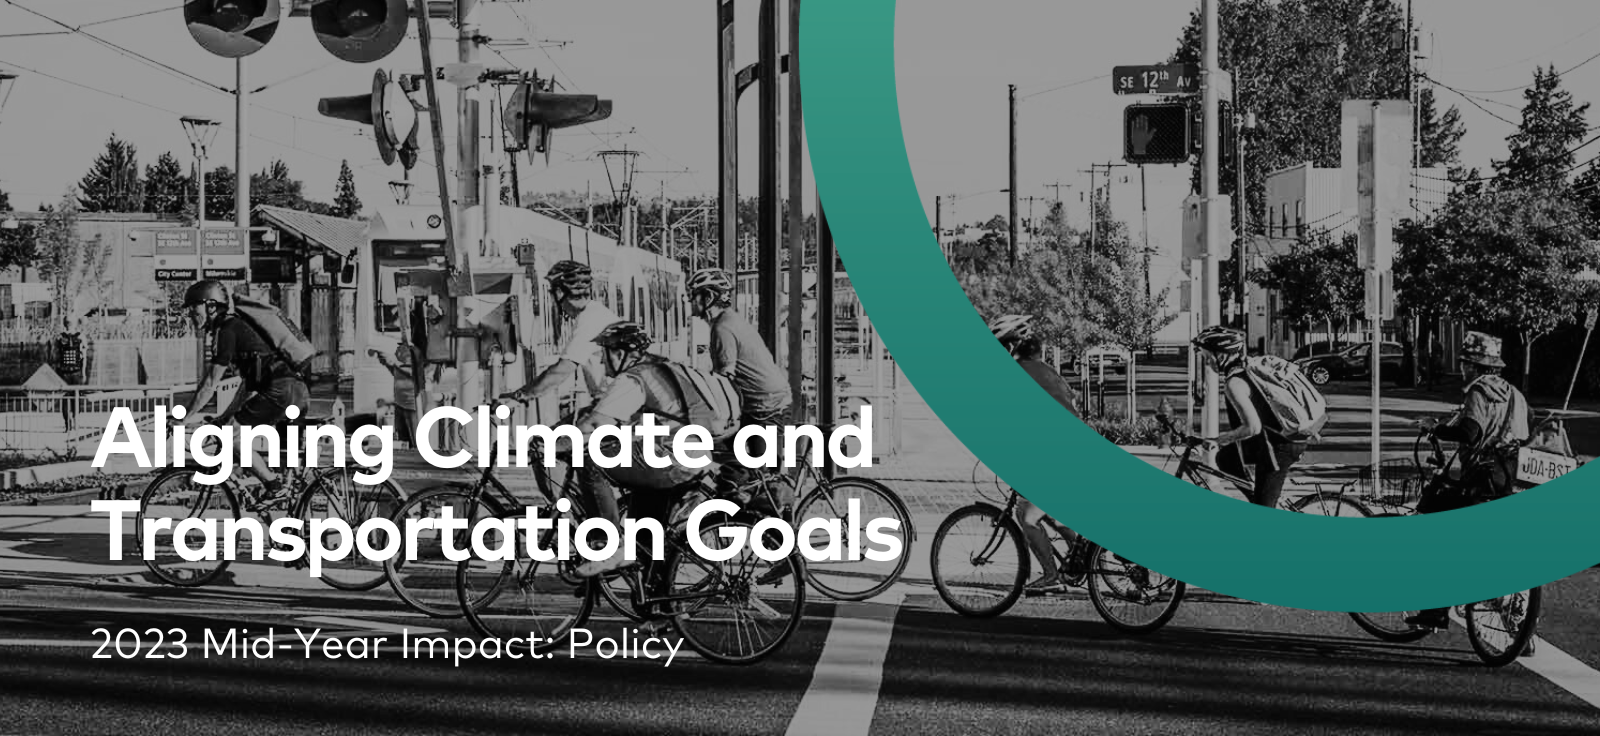 Aligning Climate and Transportation Goals - Policy 2023 Mid-year Impact